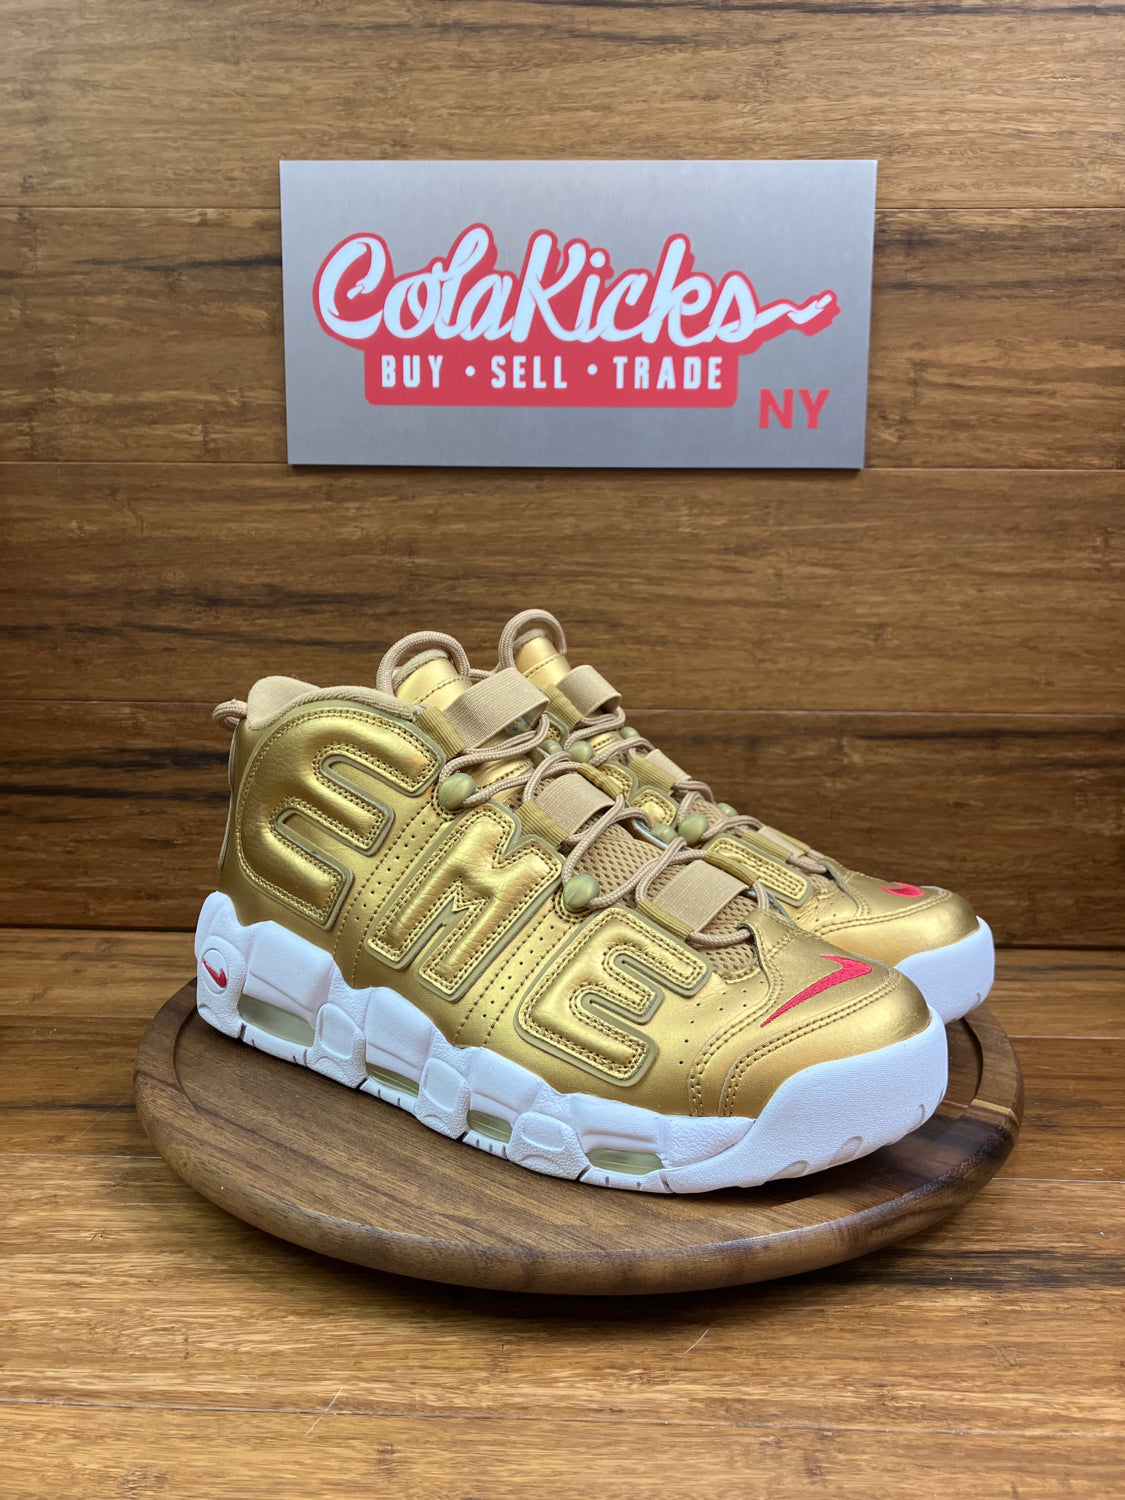 Nike Pre-owned Nike Air More Uptempo Supreme Subtempo Red Rep